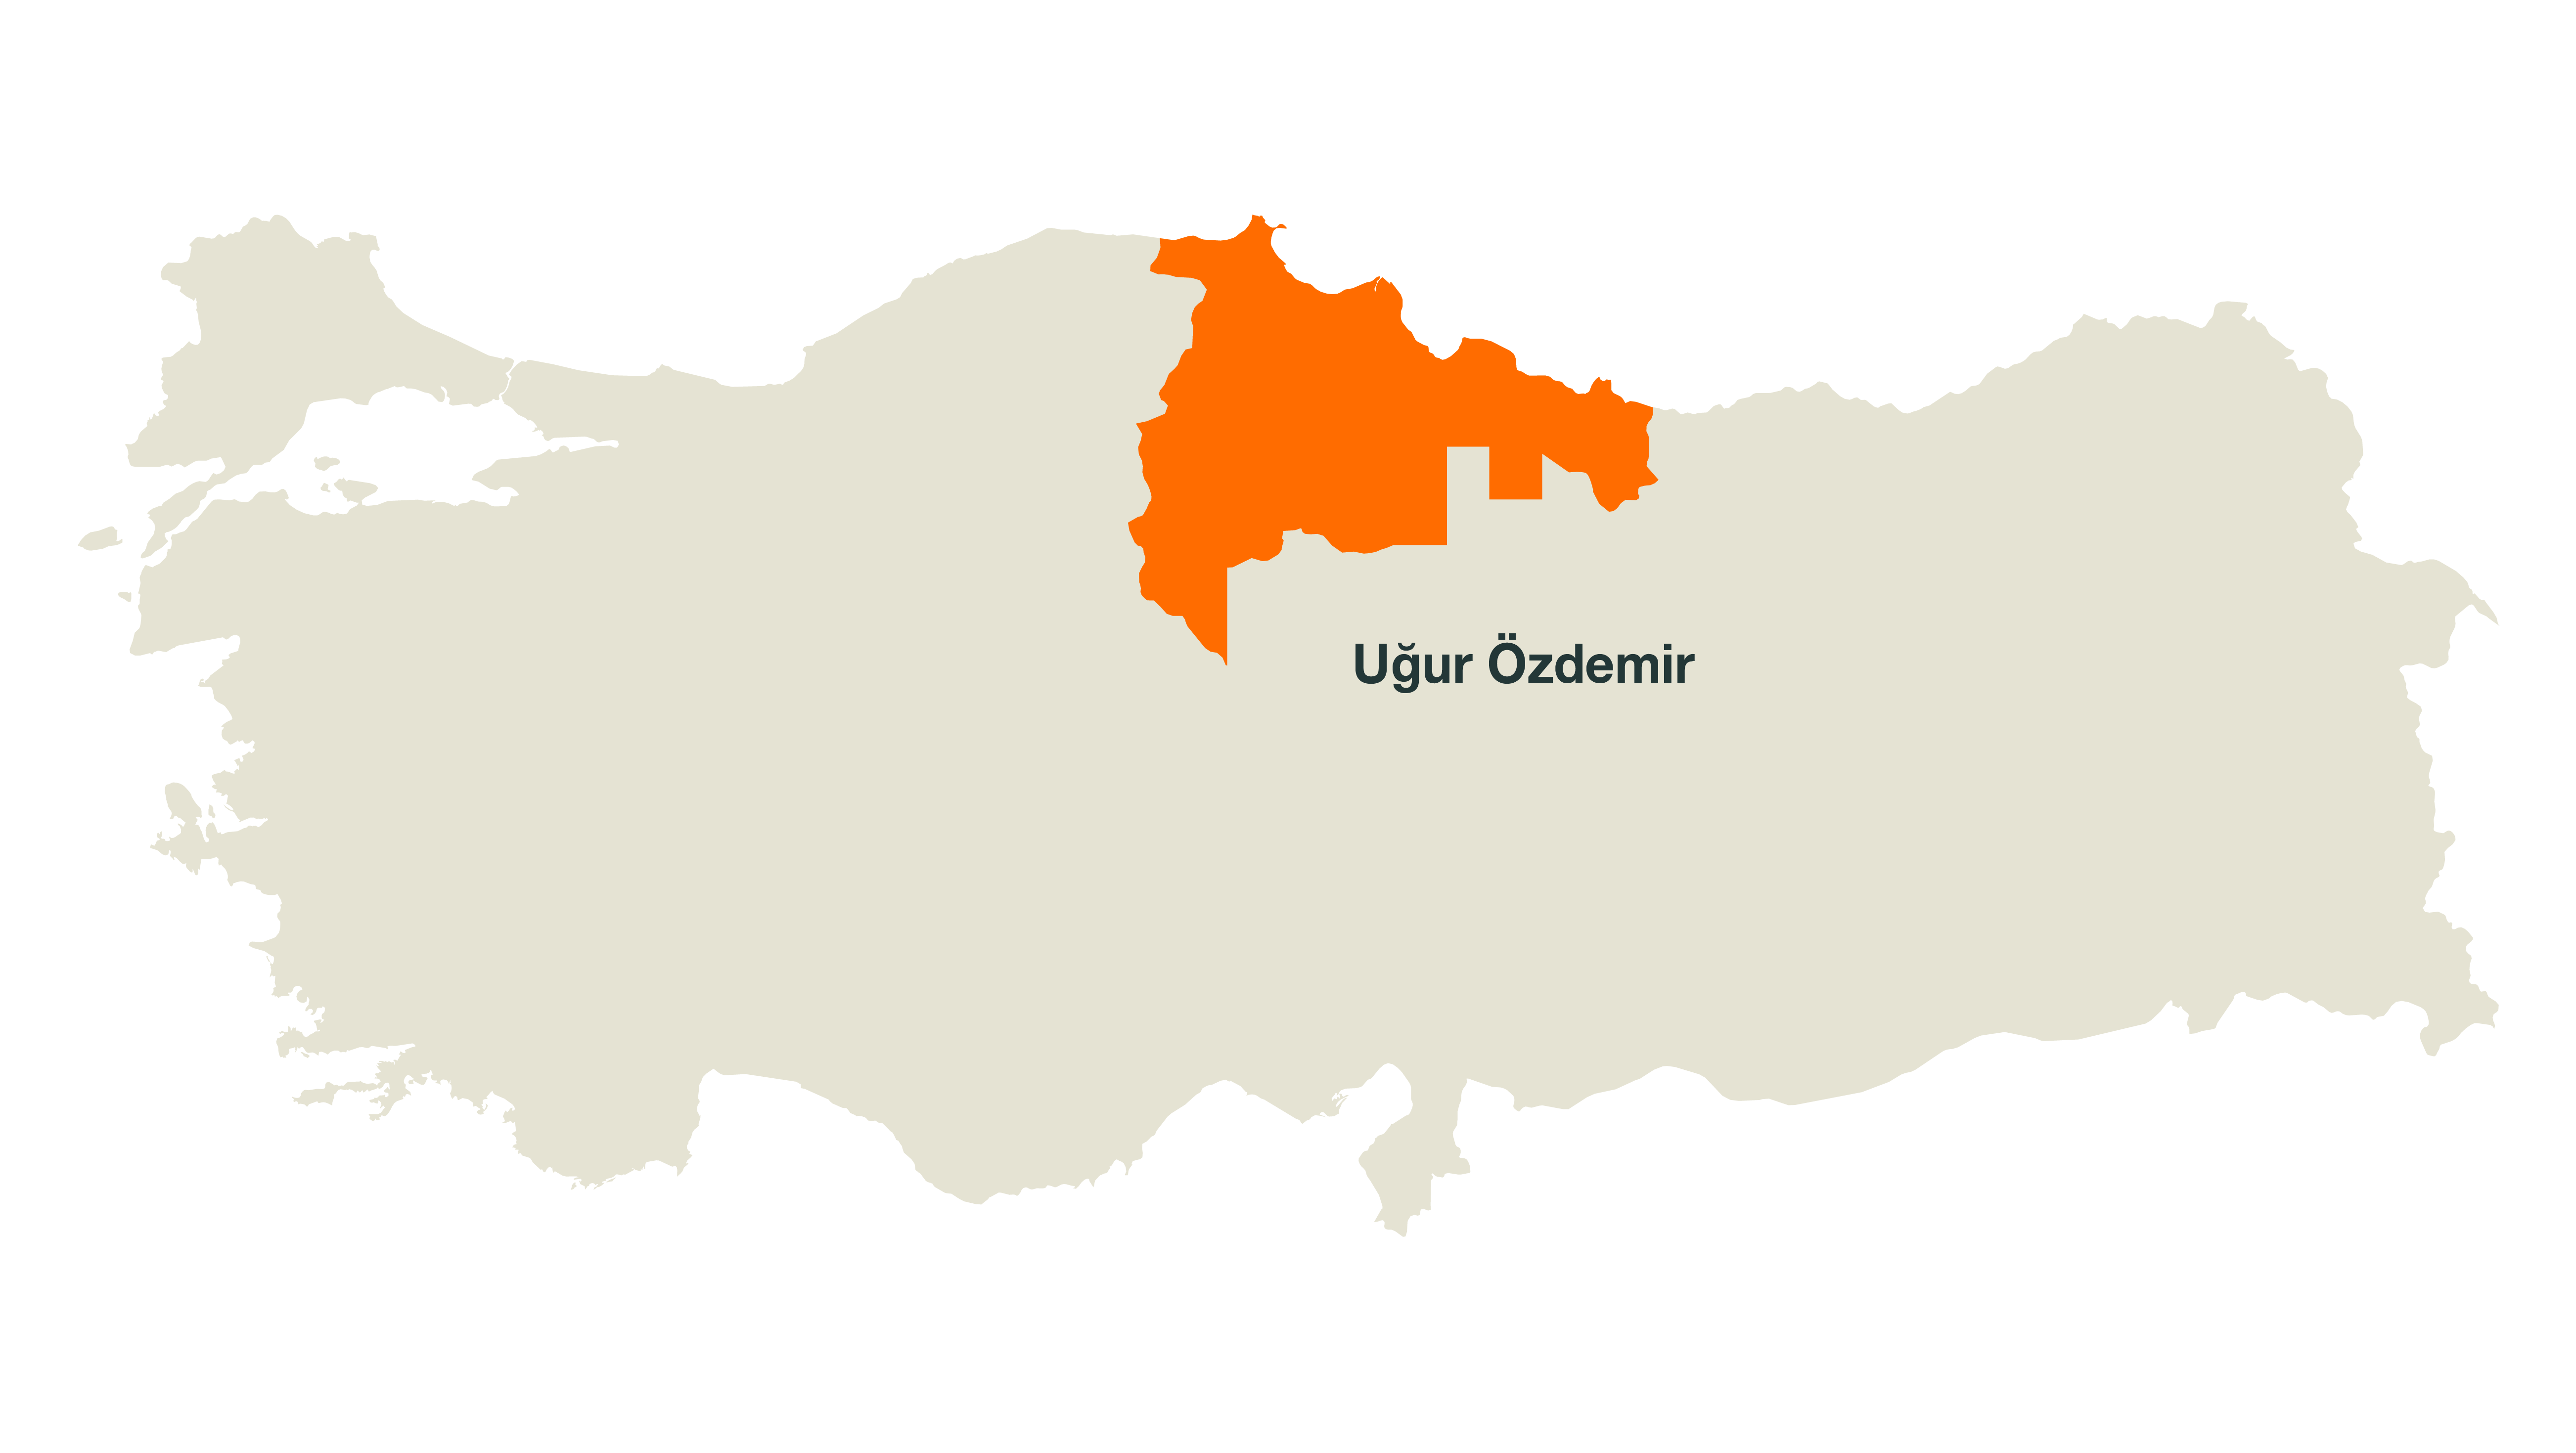 kws-tr-consultant-map-sugarbeet-ugur-ozdemir.png